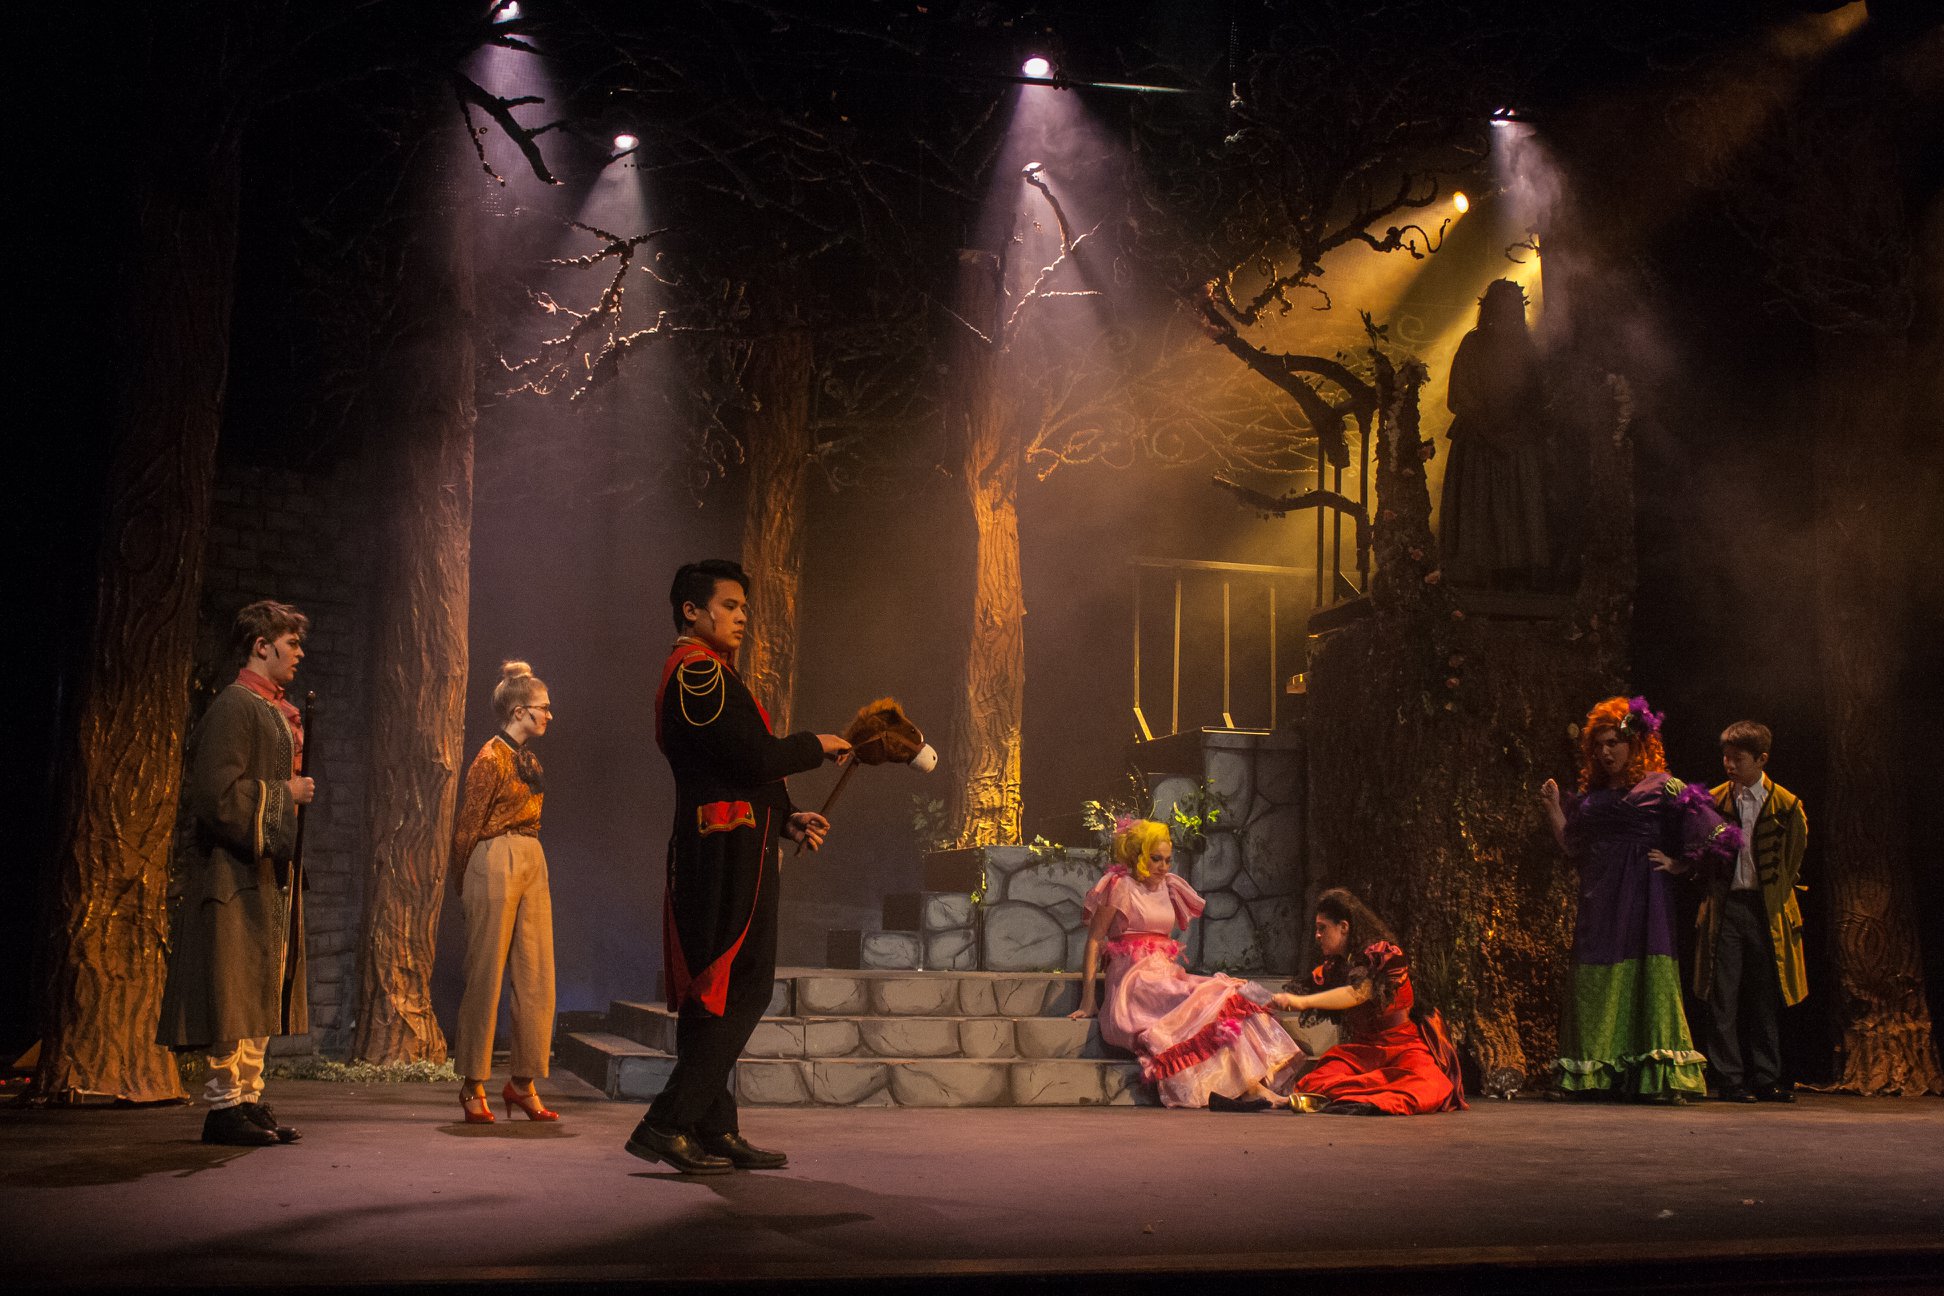    Into the Woods  by Lapine &amp; Sondheim Fordham University   Musical direction by Alex Parrish Scenery design by Annika Fagerstorm Costumes design by Megan O’Keeffe &amp; Griffin LaMarche Lights design by Helen Bucks &amp; Gillian Roberts Sound d